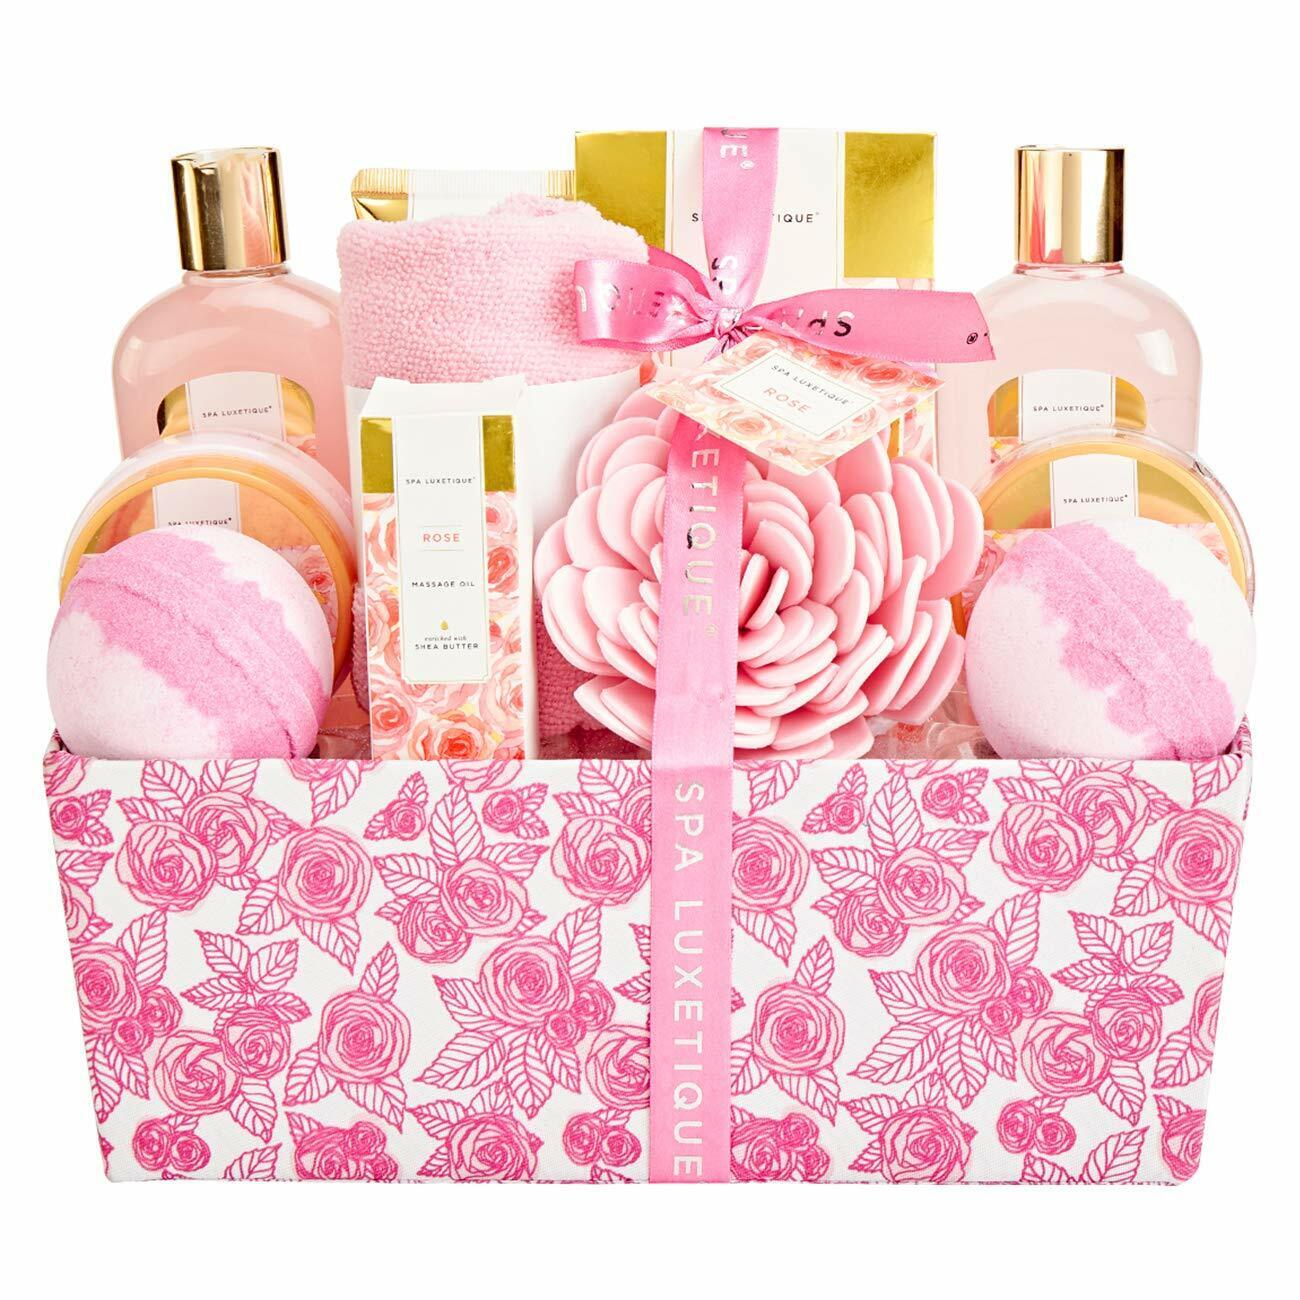 Home Spa Gift Set for Women Rose Body Financial sales Max 69% OFF sale and Bath Scent 12pcs